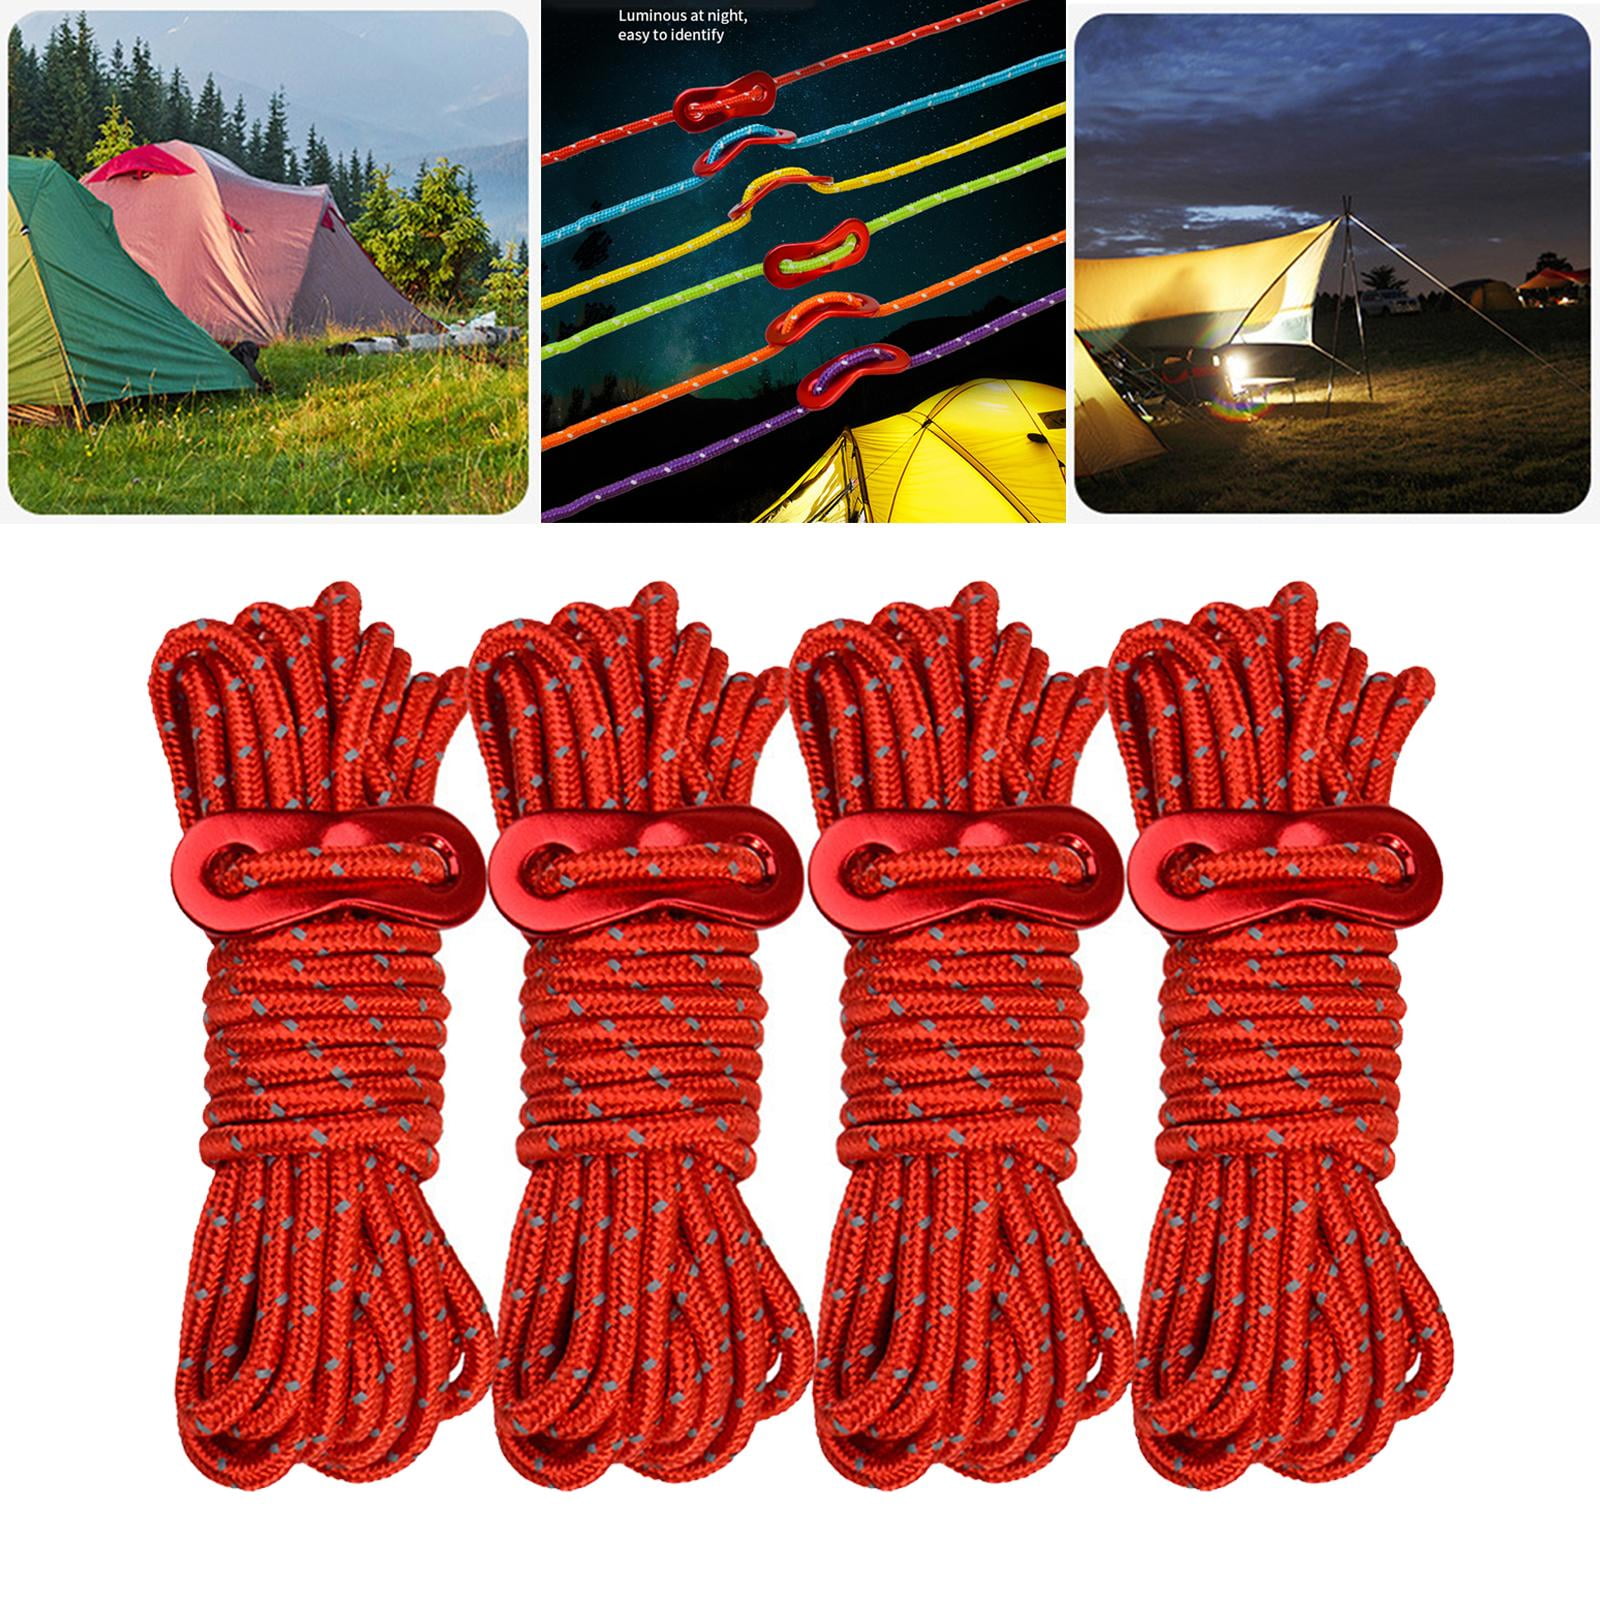 4 Strong Tent Guy Ropes 